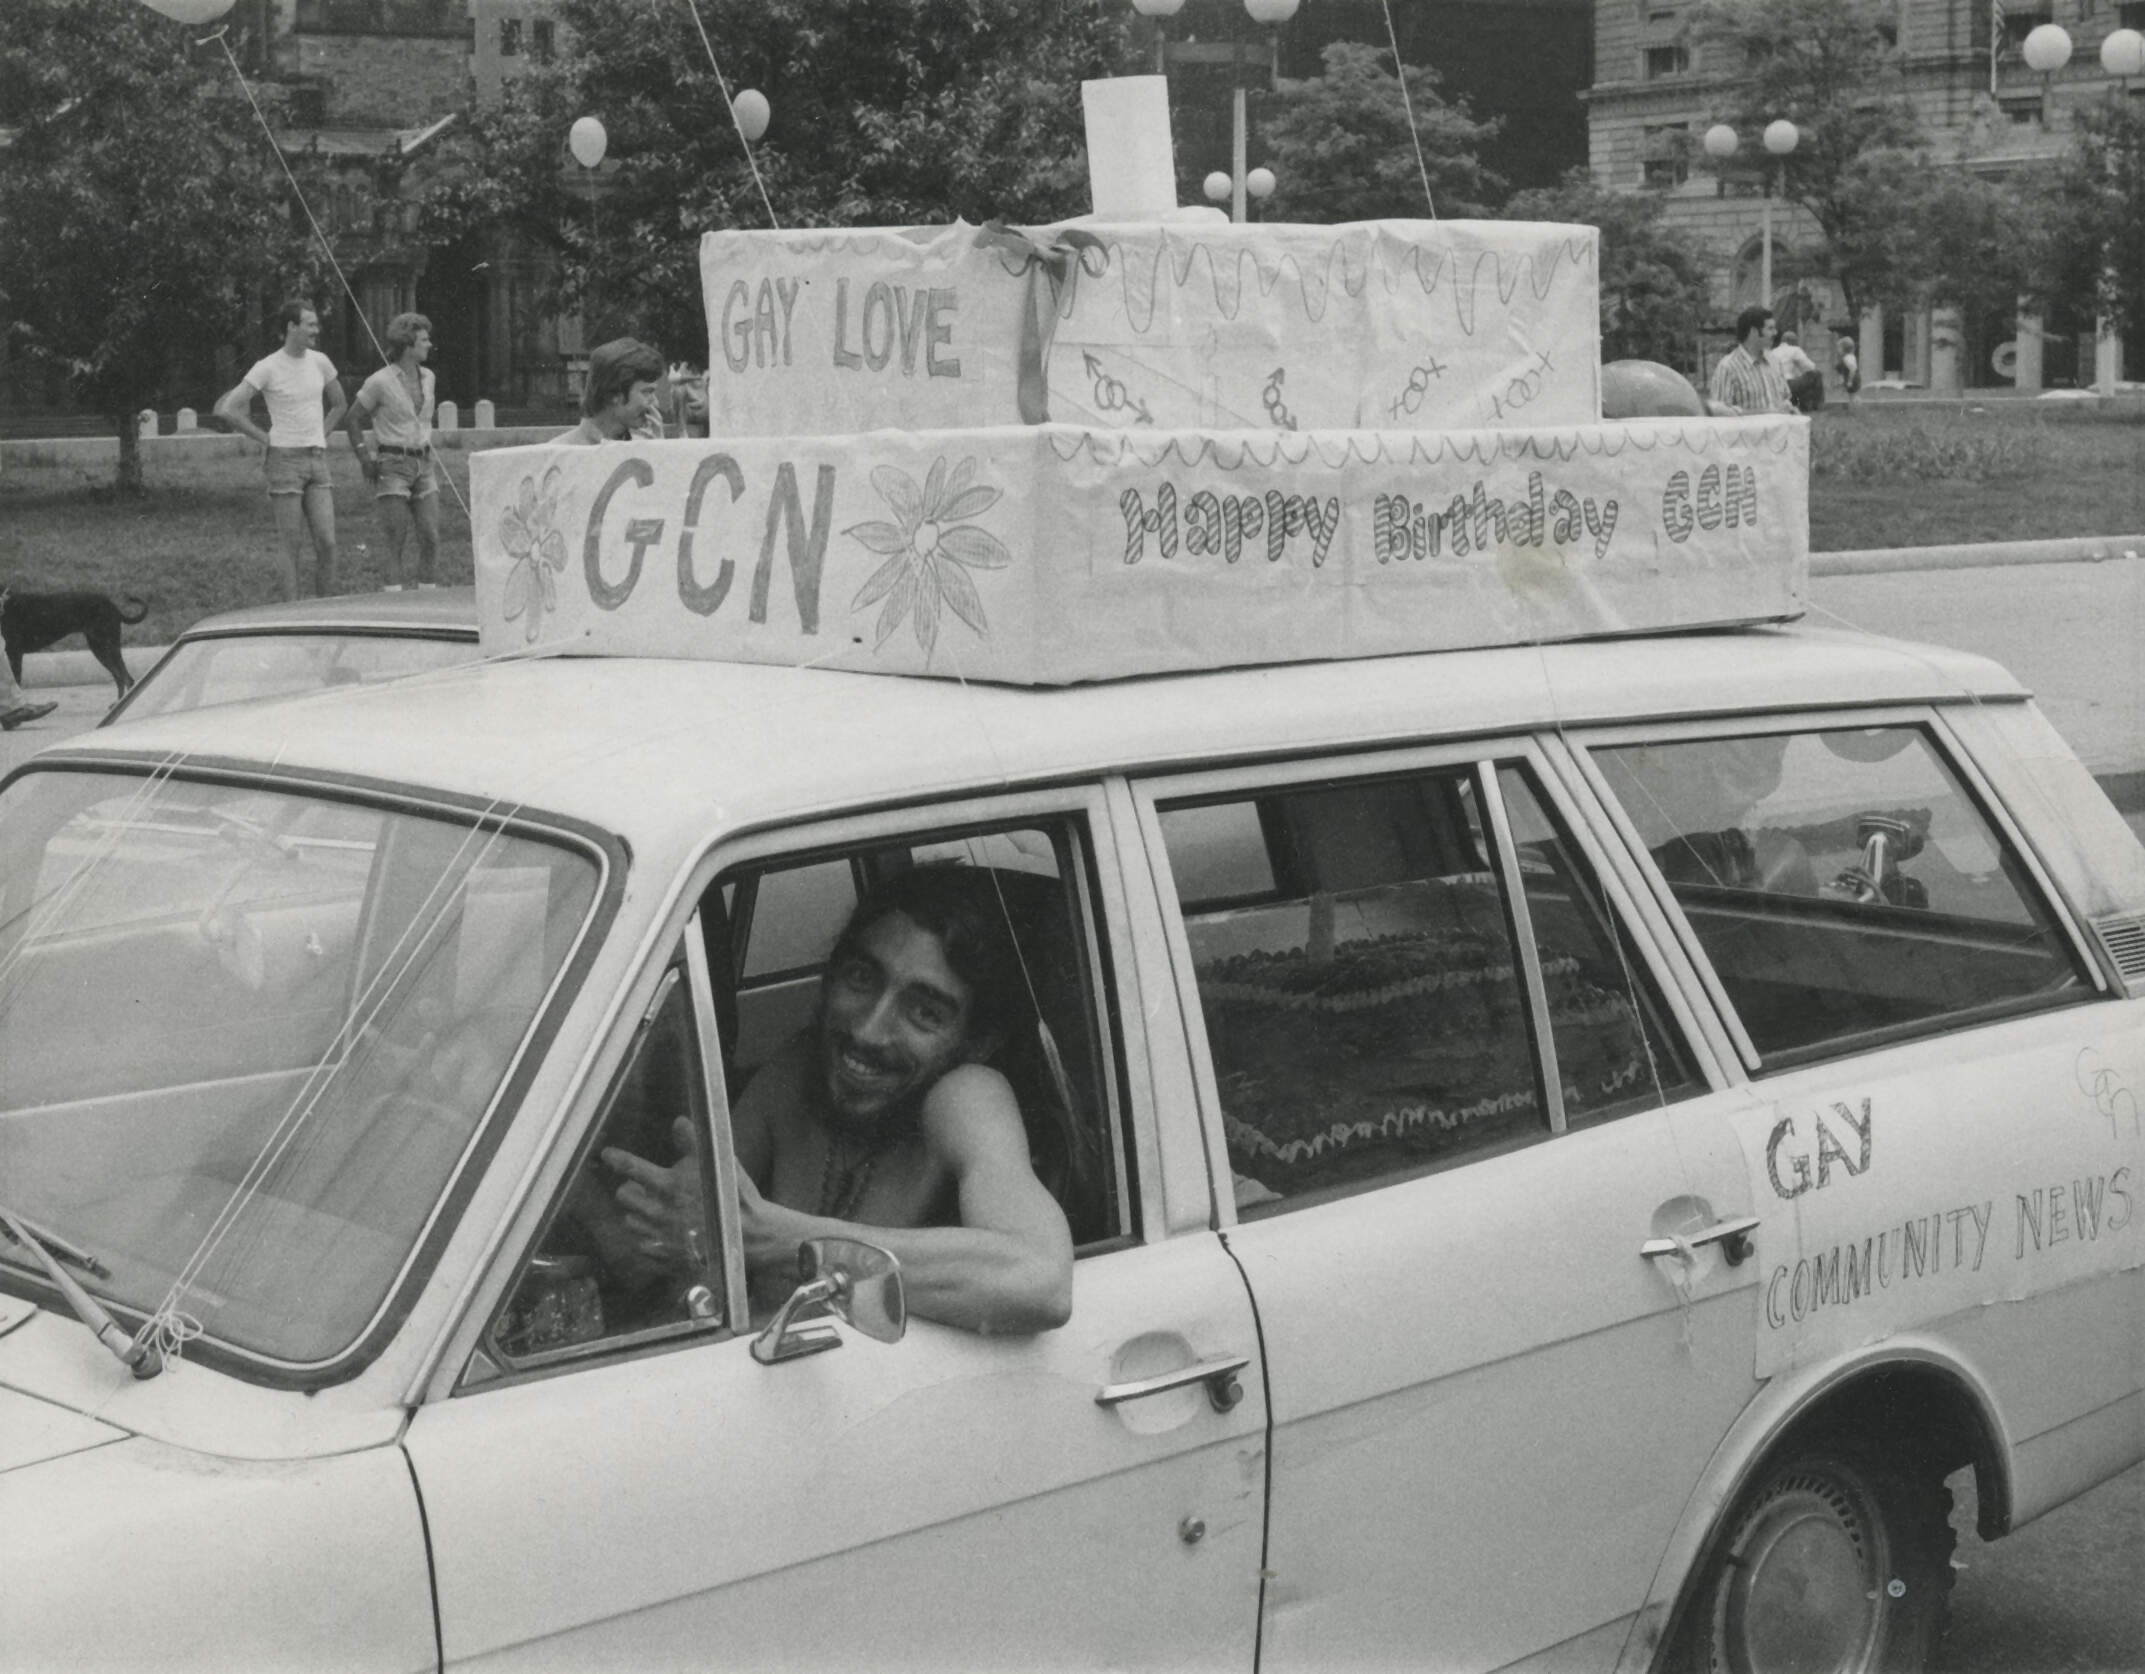 Gay Community News Office Manager Ron Arruda driving a GCN birthday cake in the 1974 Pride parade and celebration in Boston. (Courtesy The History Project)